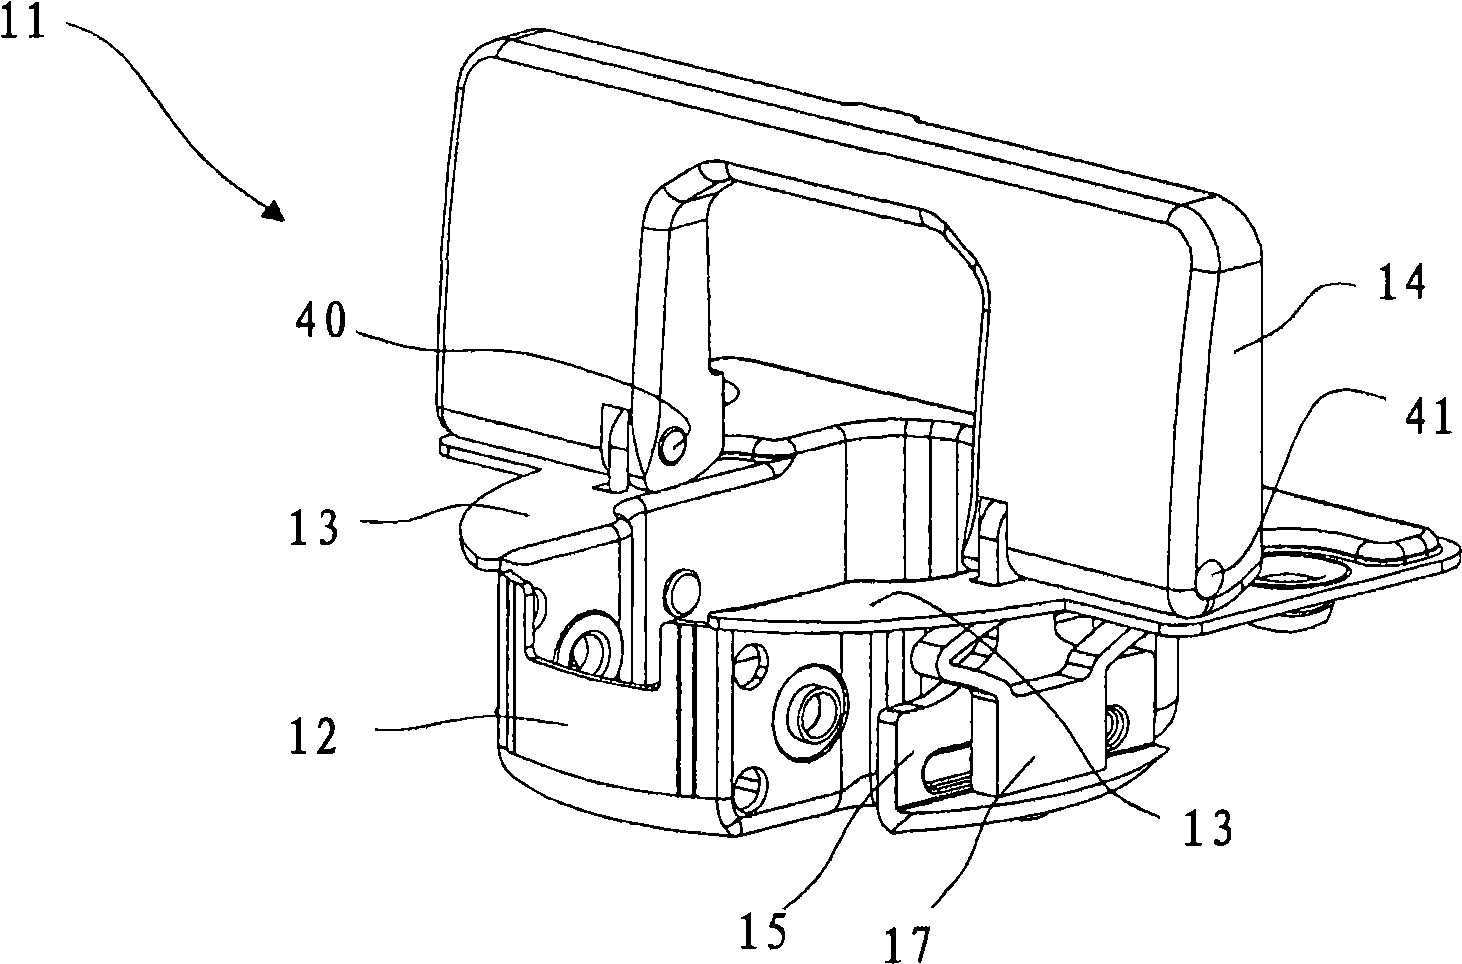 Rapidly mounted hinge wing for furniture